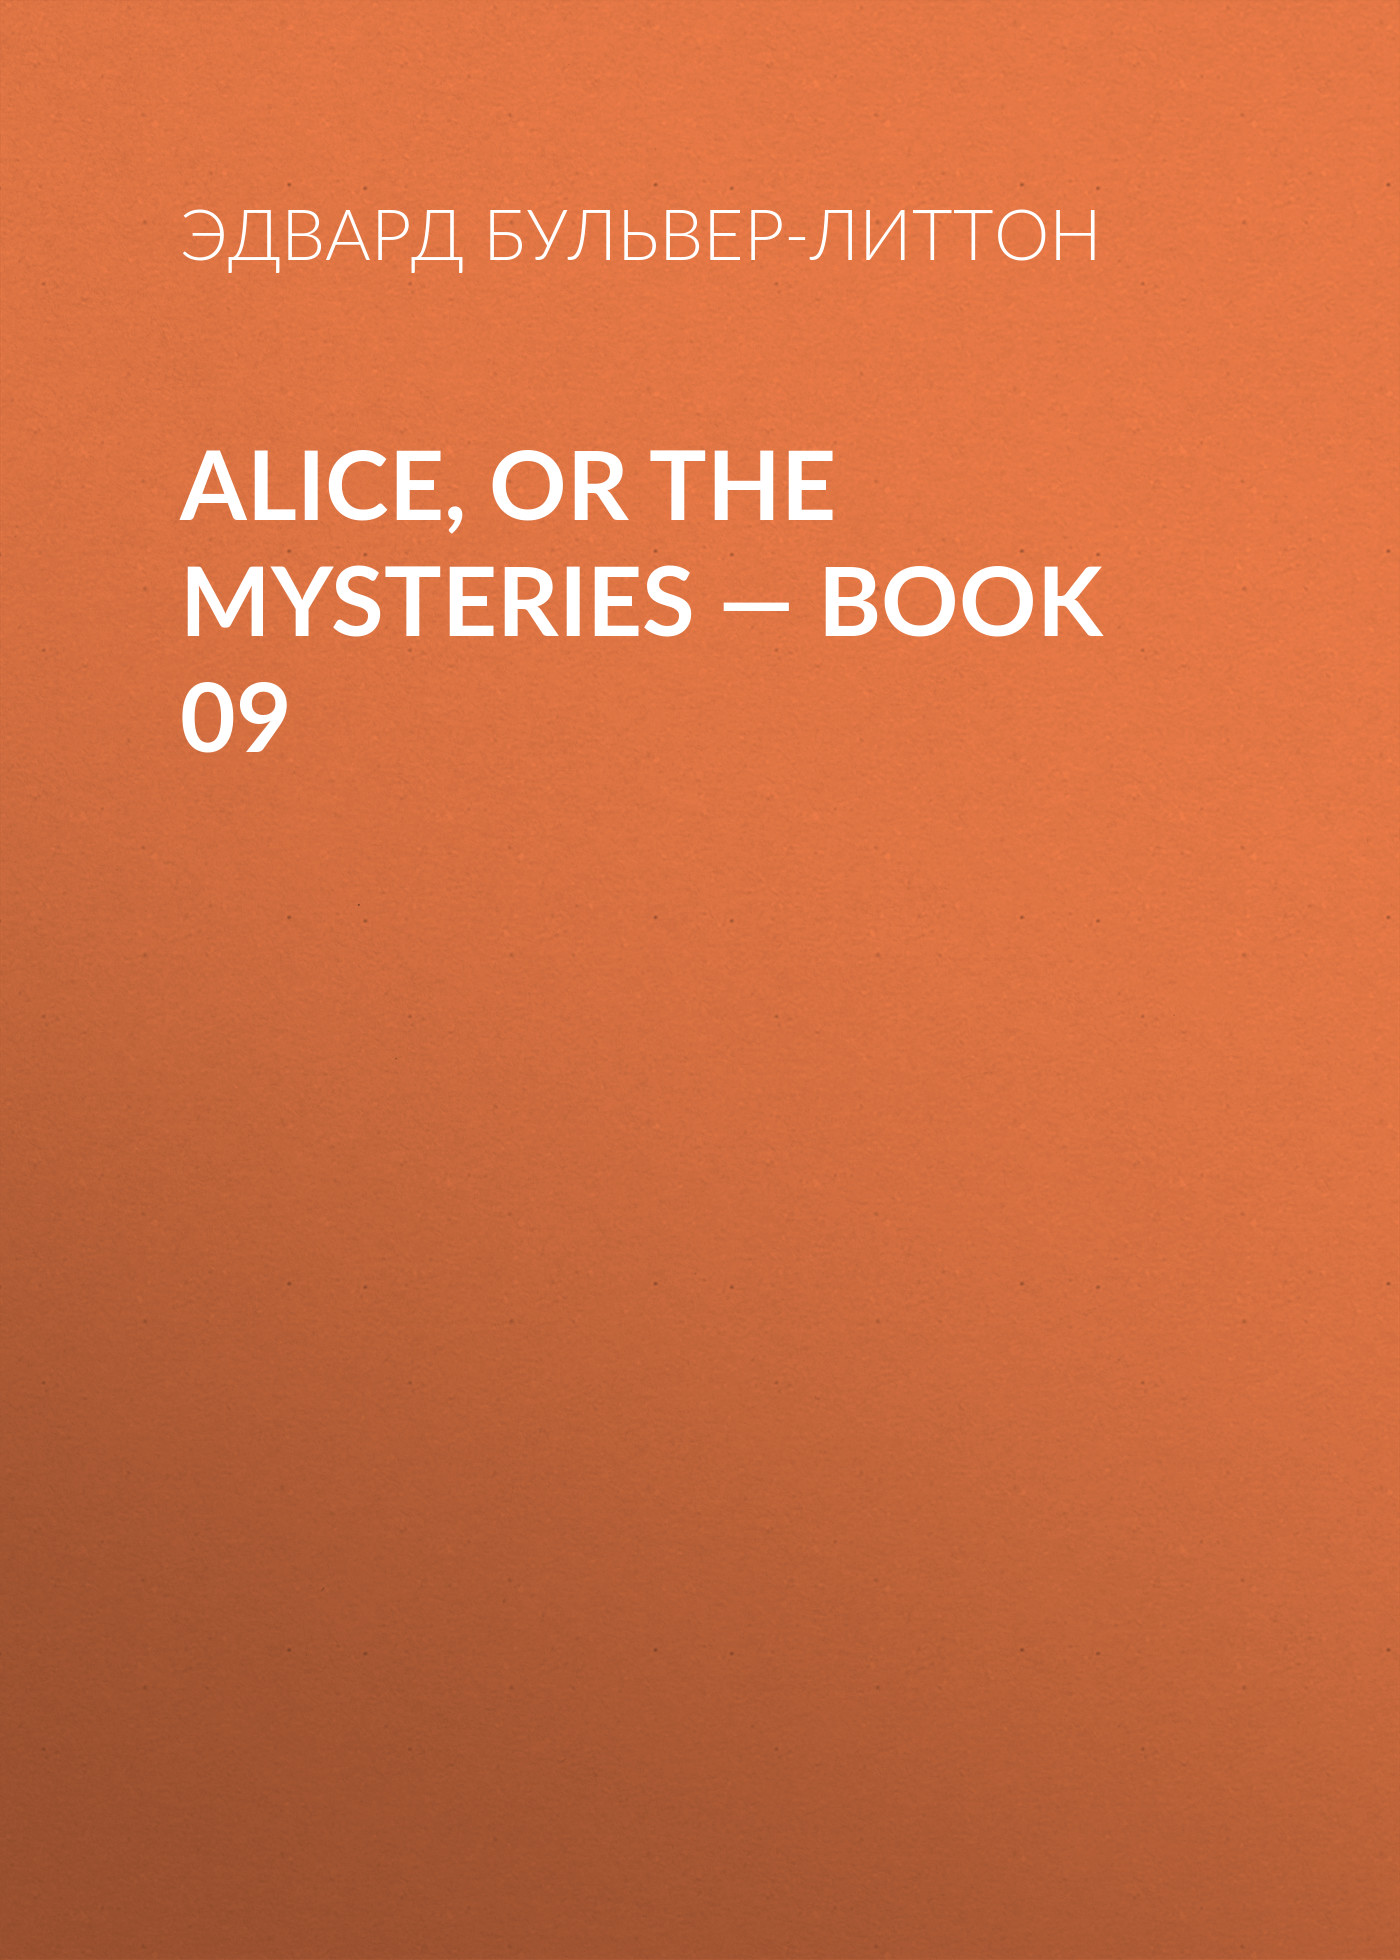 Alice, or the Mysteries— Book 09